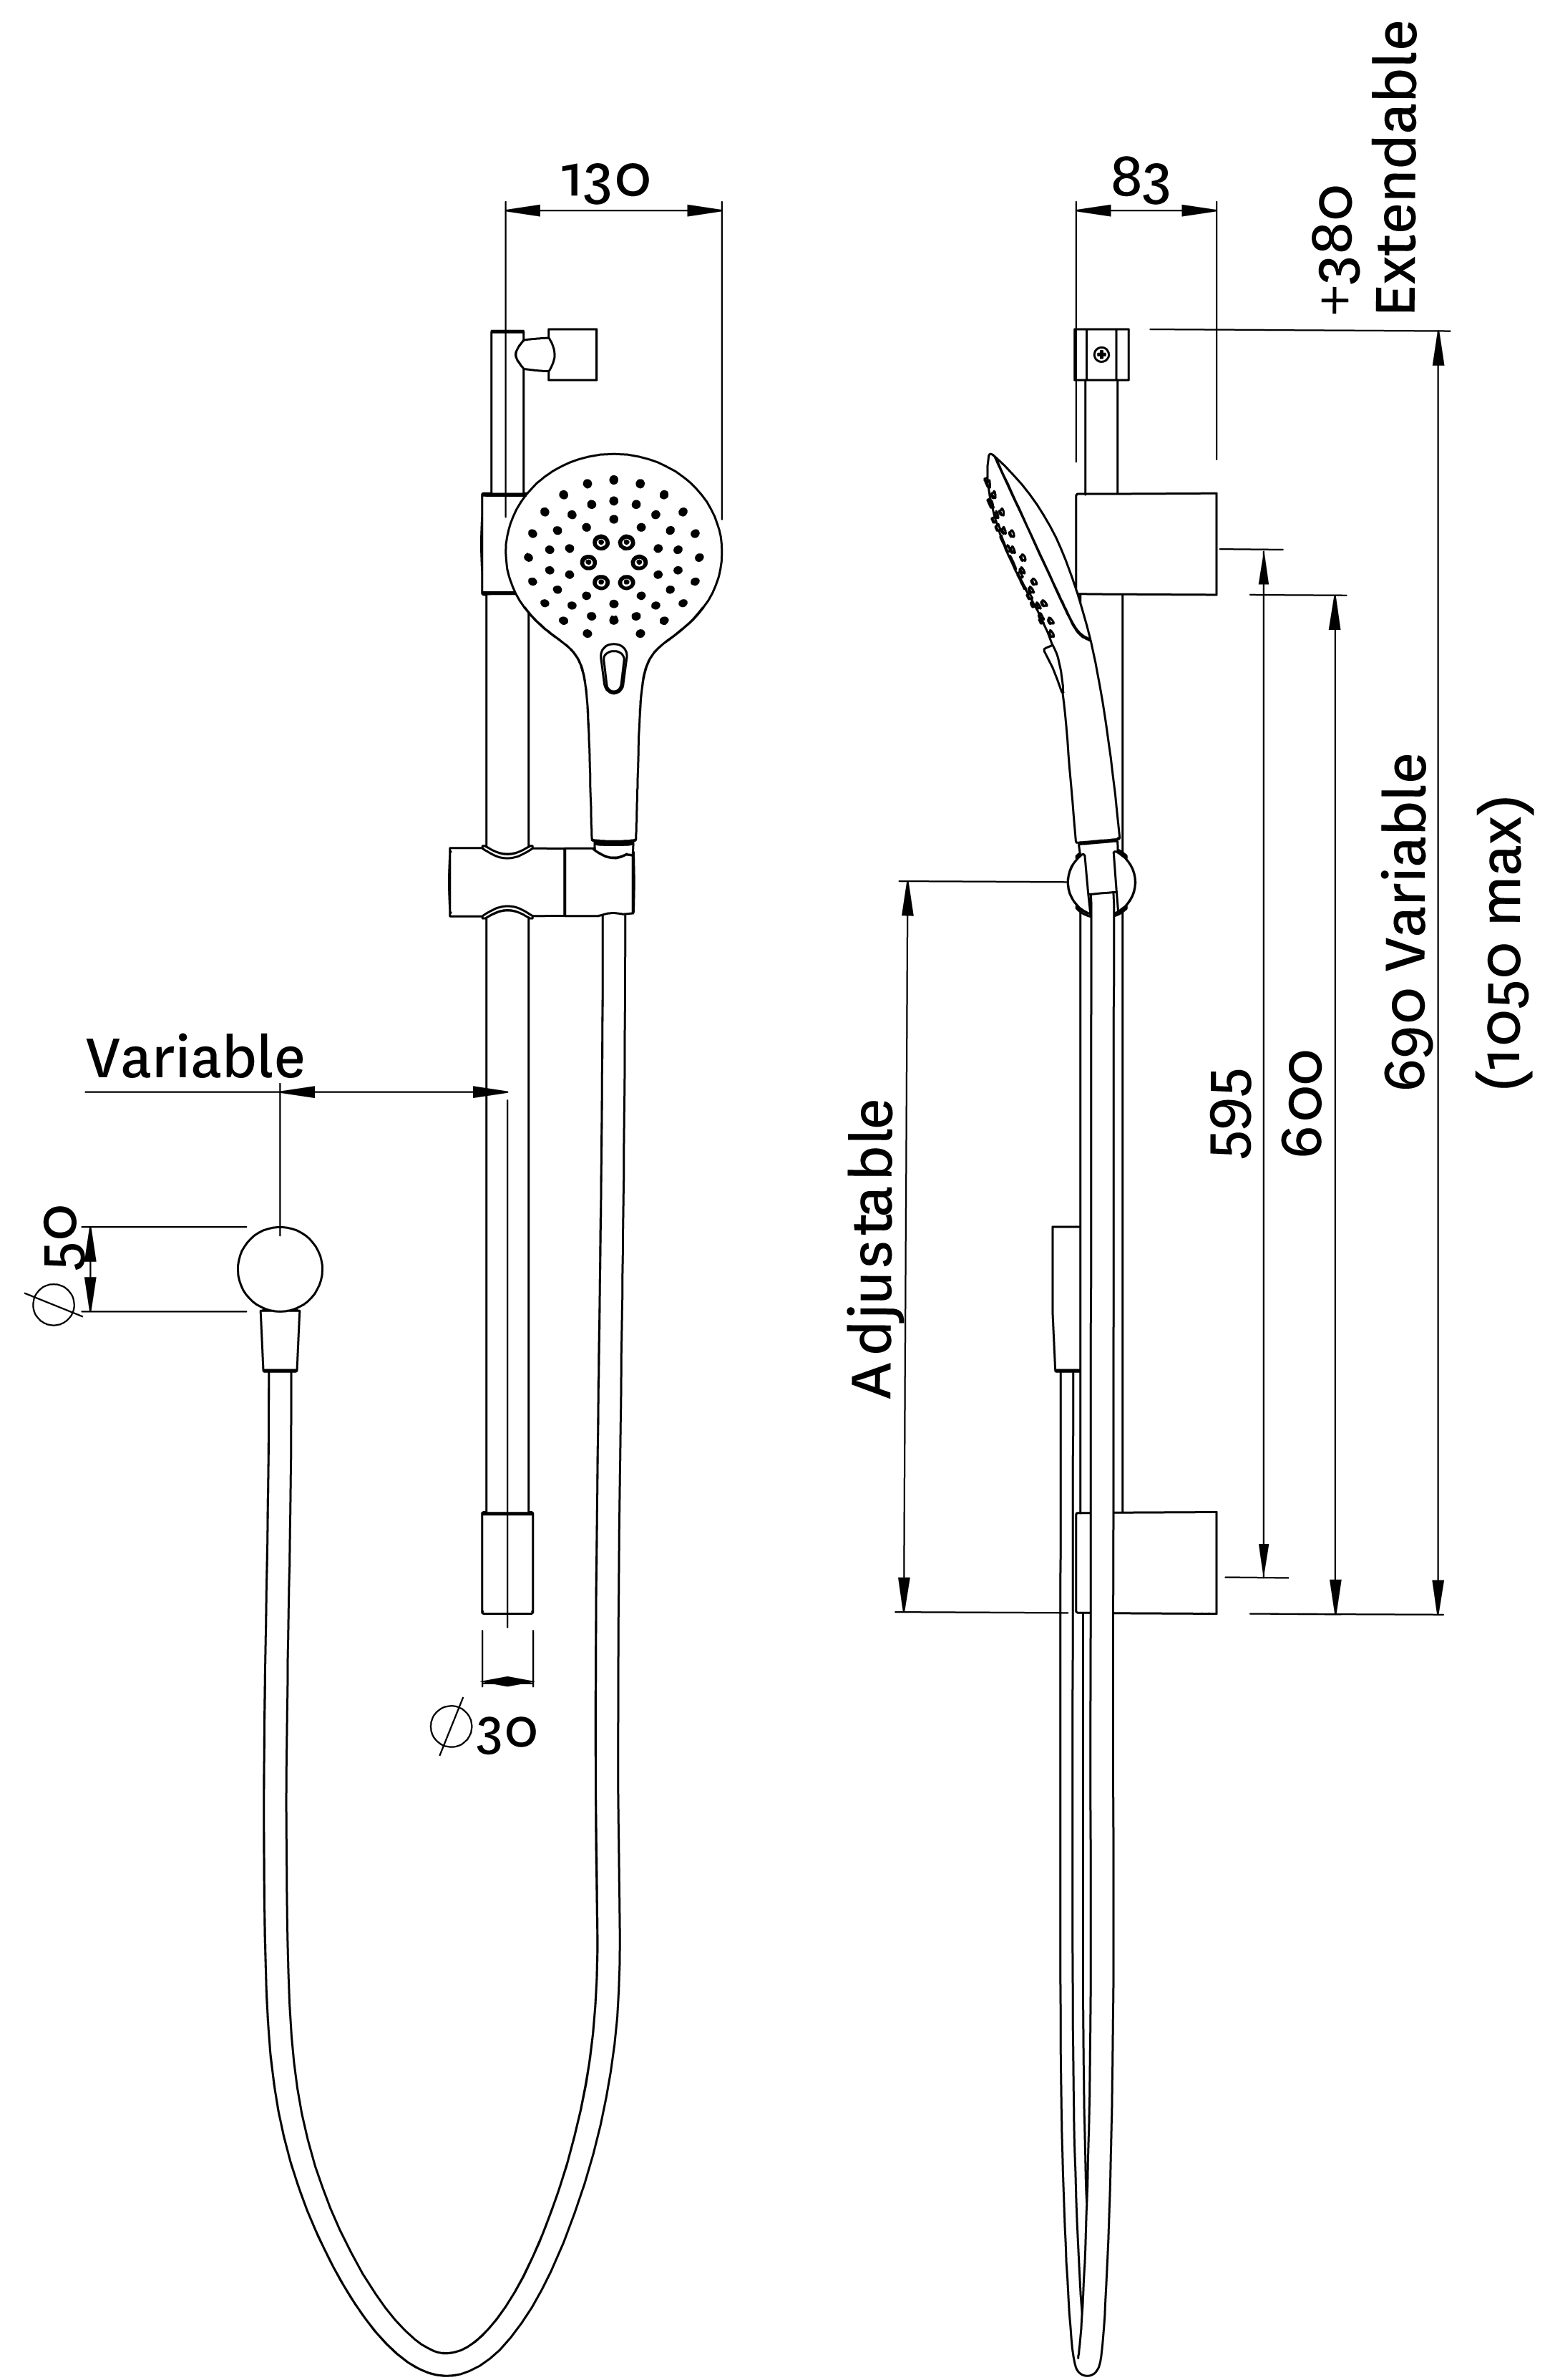 easy-click-3f-telescopic-rail-shower-technical-drawing